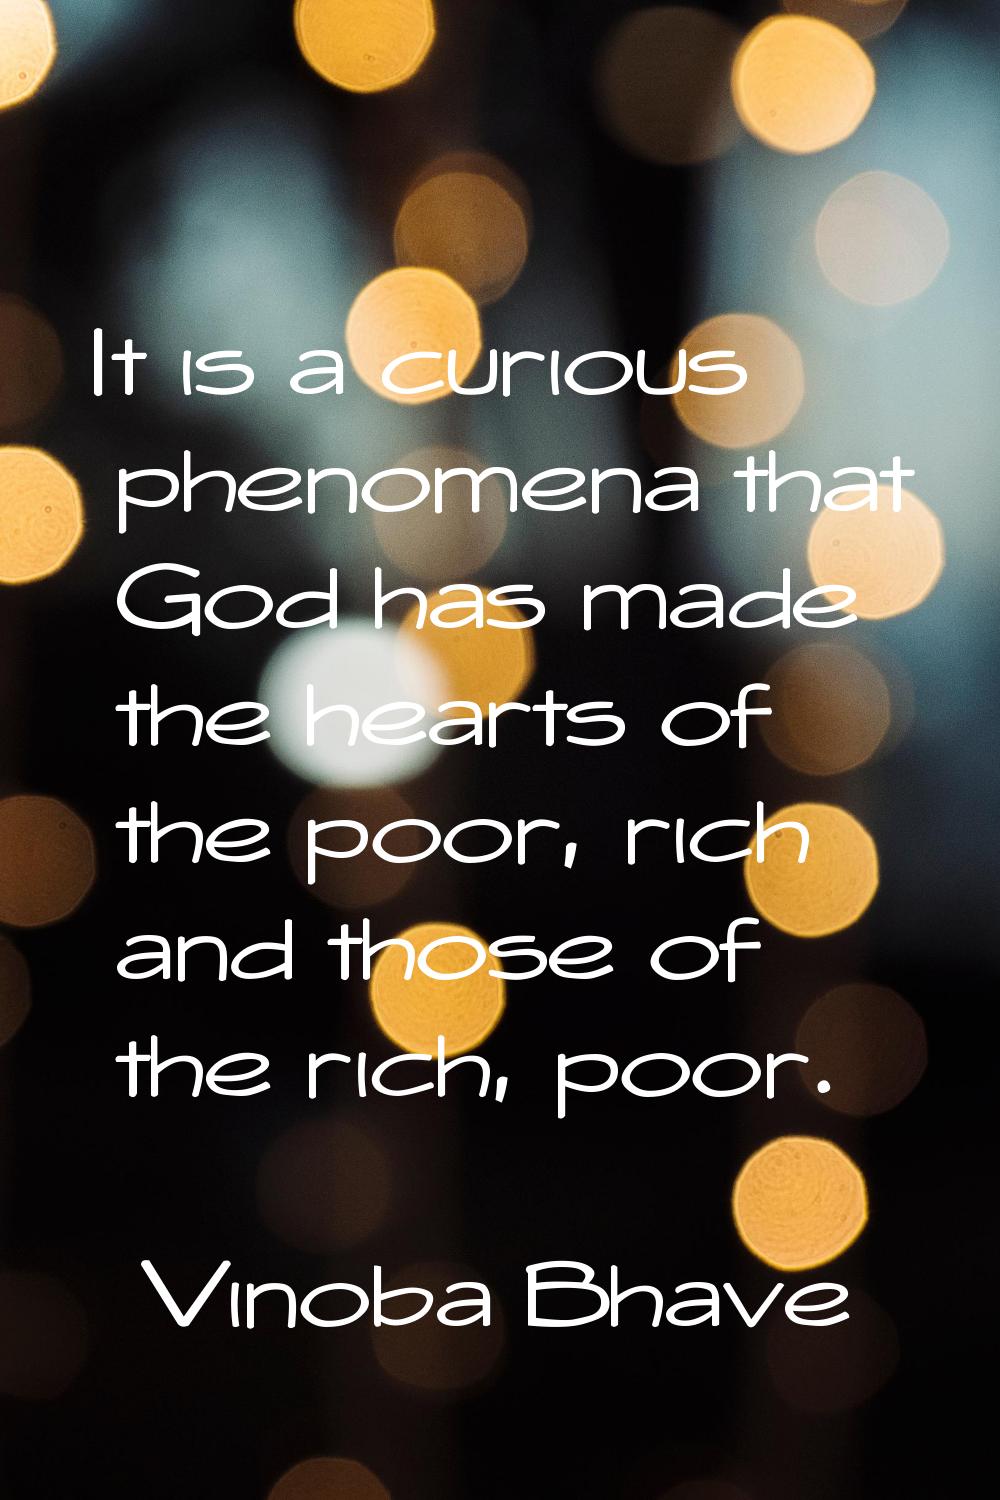 It is a curious phenomena that God has made the hearts of the poor, rich and those of the rich, poo